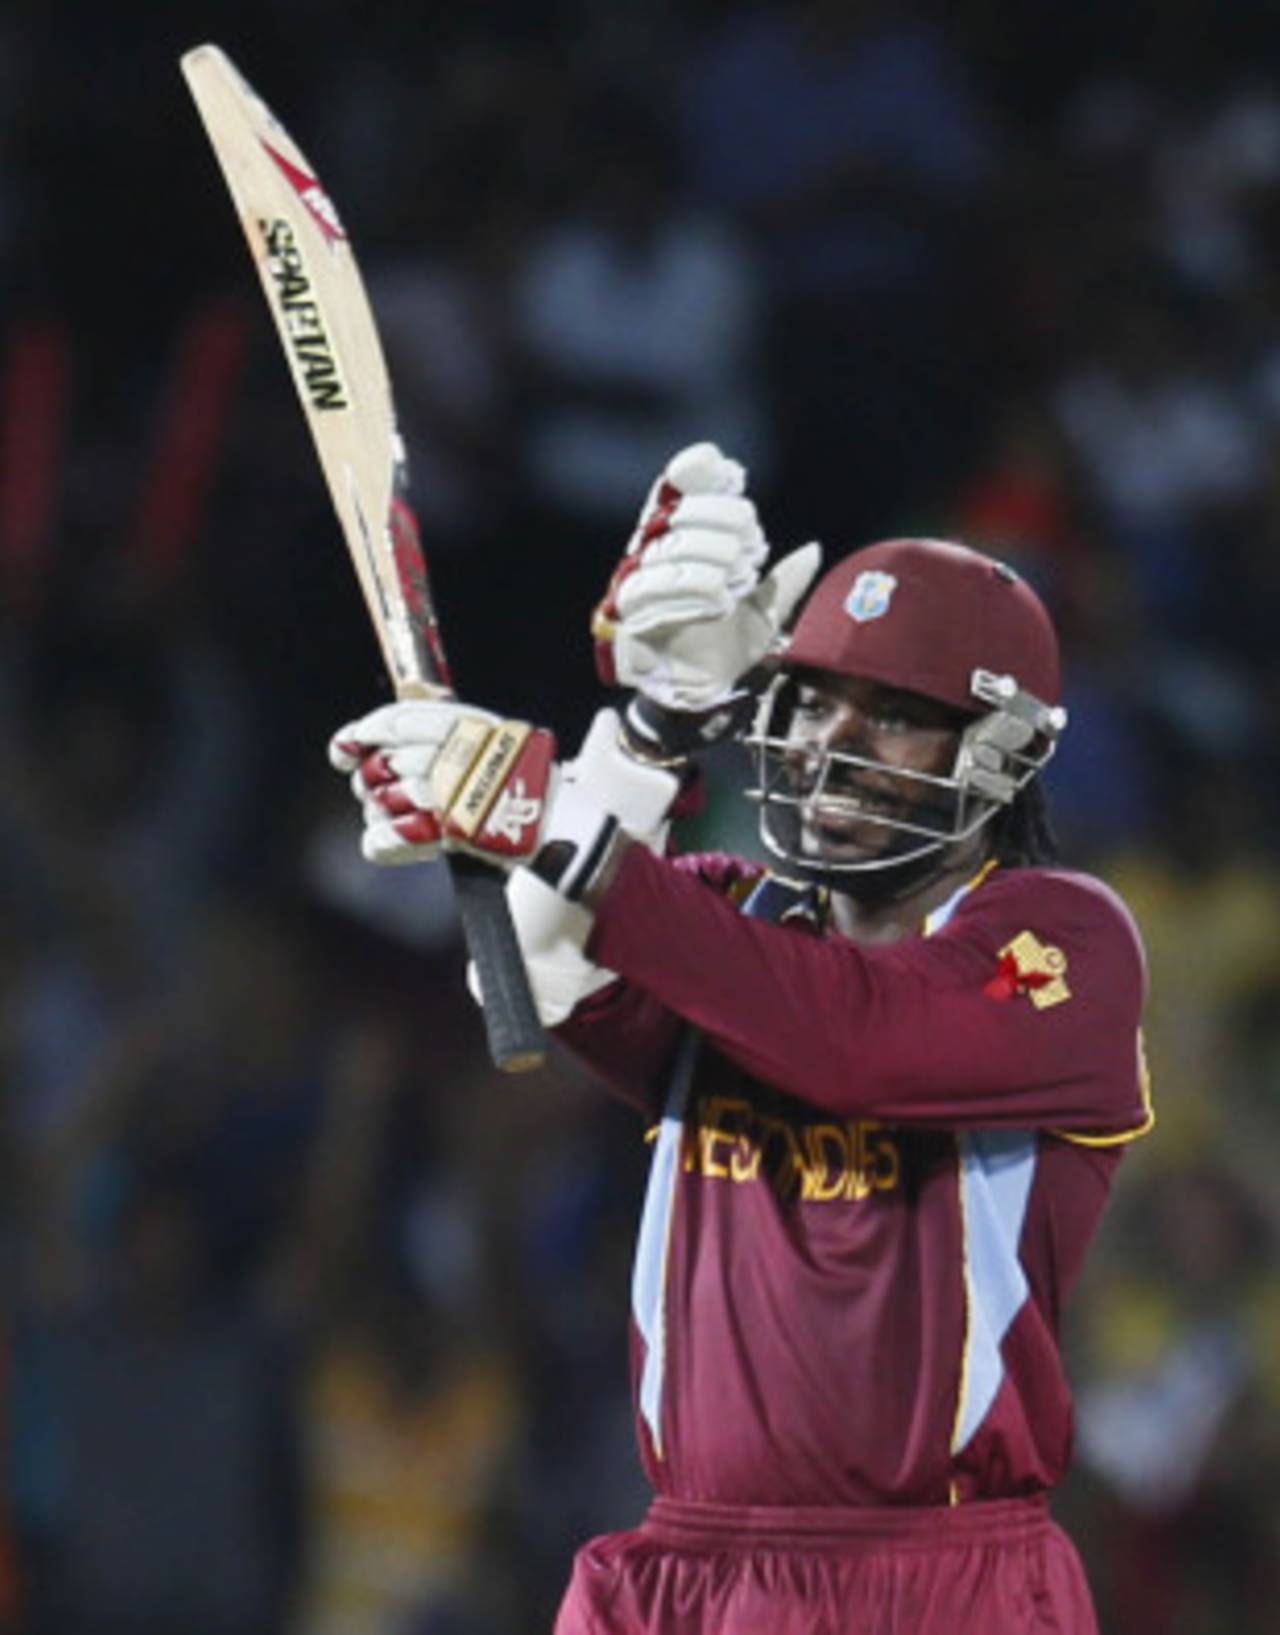 Forty-one balls was enough for him to make 75 not out. He does not need long to make an impact&nbsp;&nbsp;&bull;&nbsp;&nbsp;Associated Press